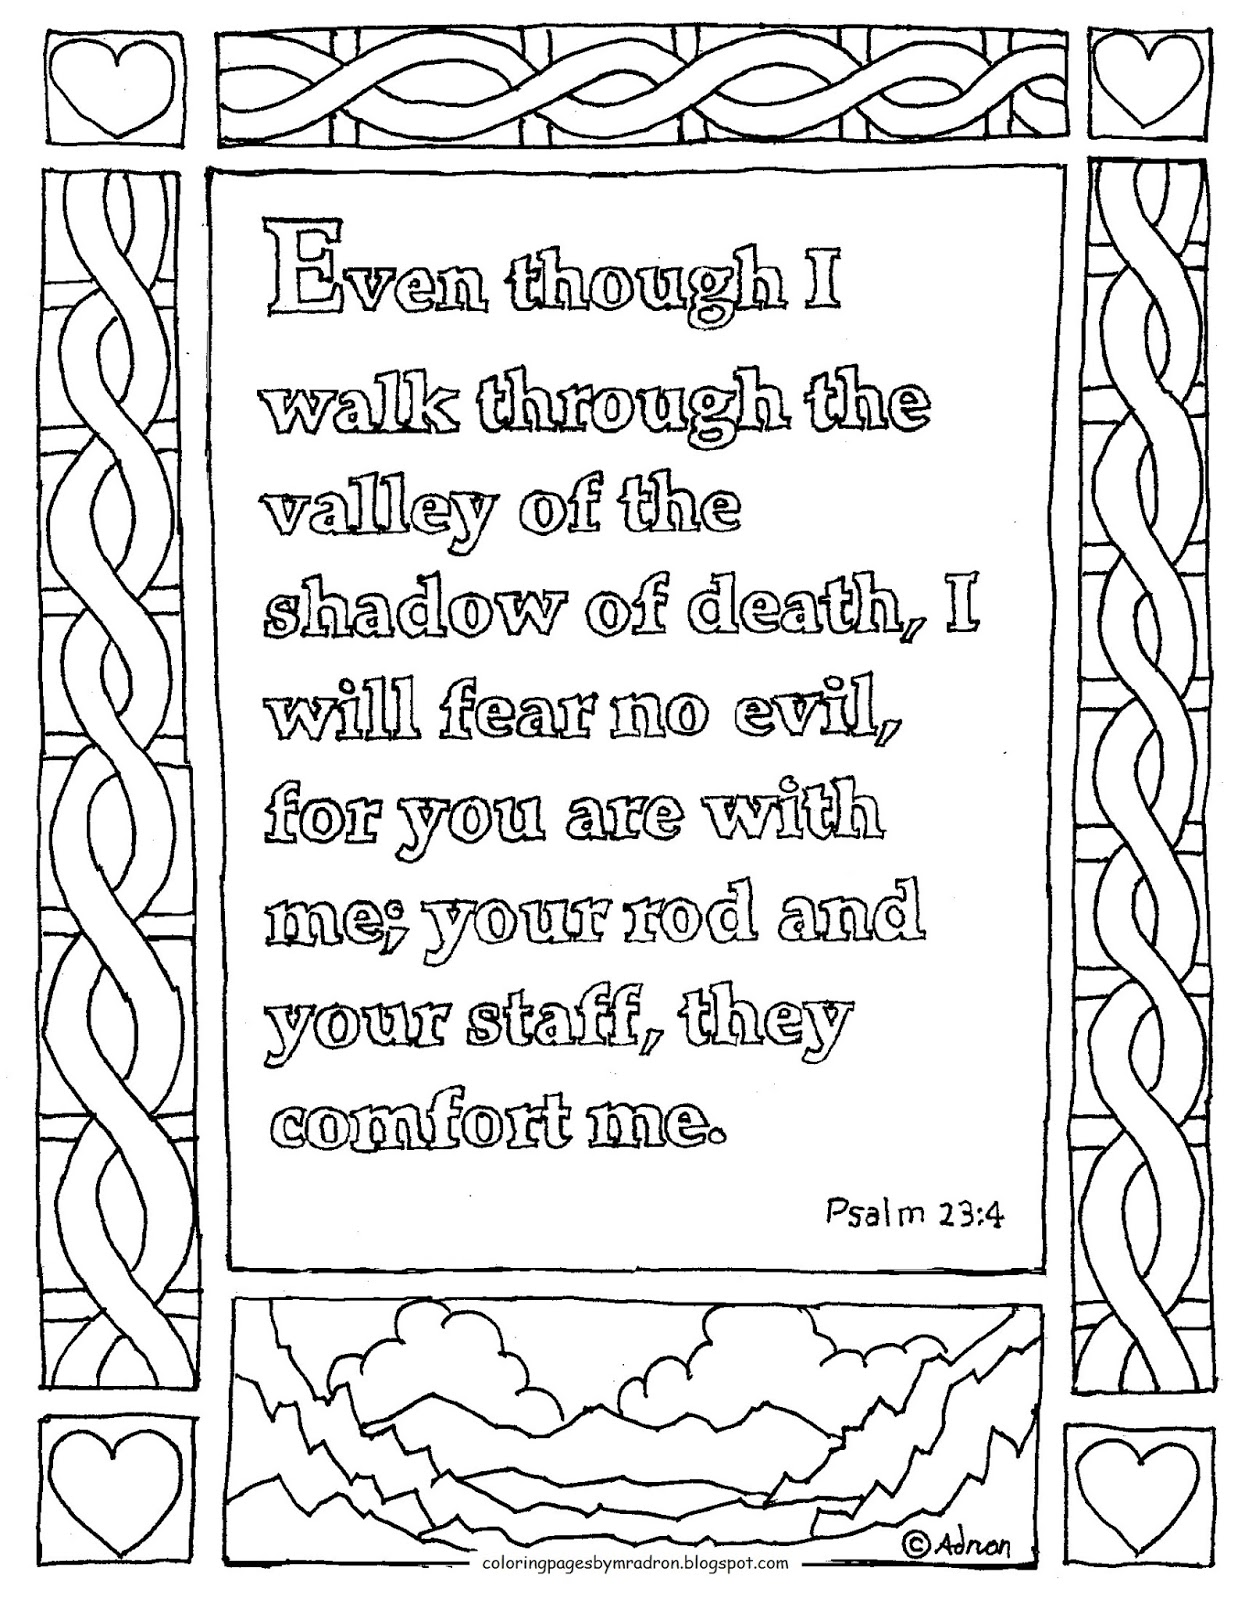 Coloring Pages For Kids By Mr Adron Printable Coloring Page Psalm 23 4 The Valley Of The Shadow Of Death